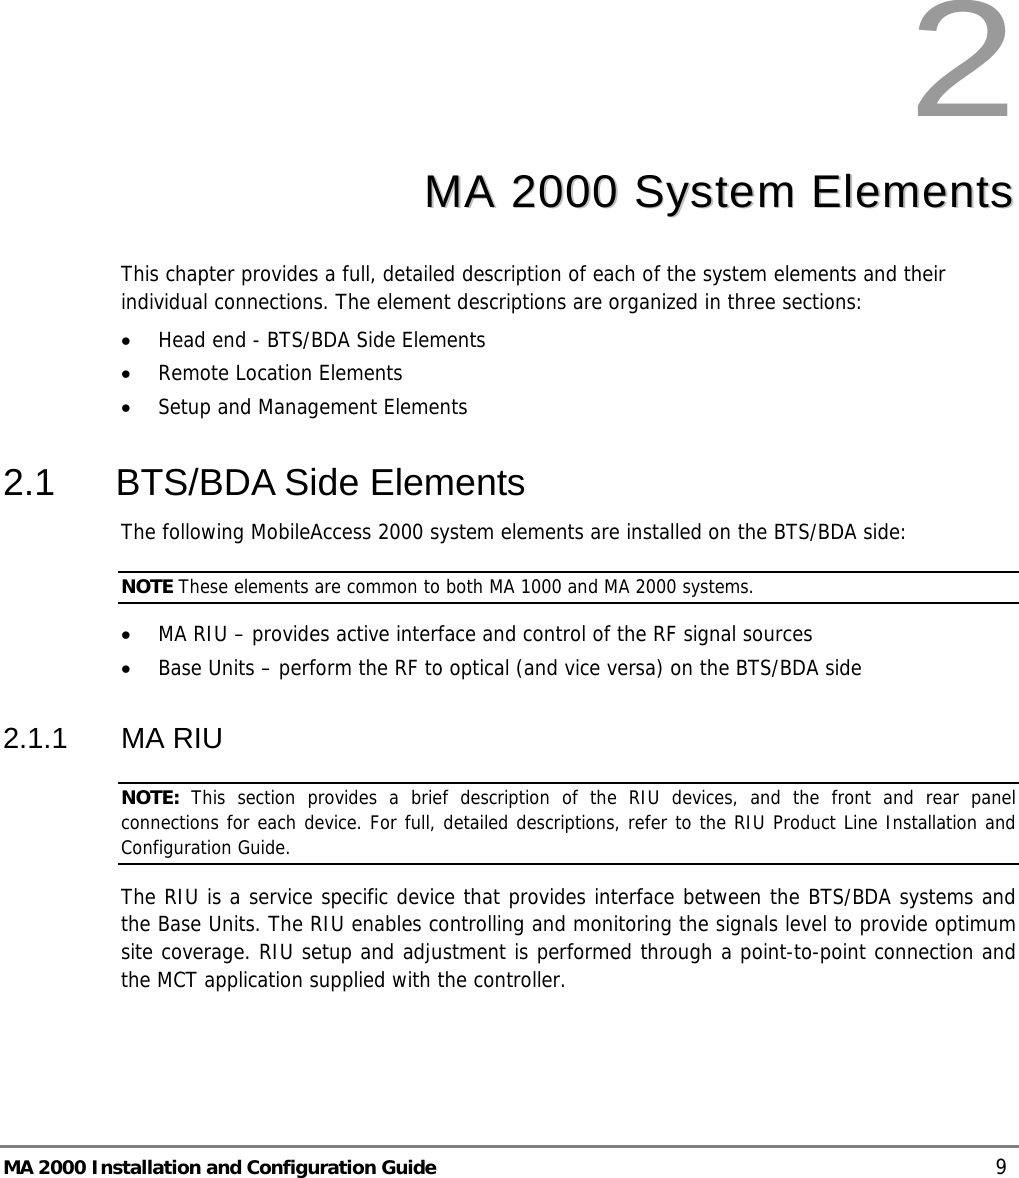  MA 2000 Installation and Configuration Guide    9 2  MMAA  22000000  SSyysstteemm  EElleemmeennttss  This chapter provides a full, detailed description of each of the system elements and their individual connections. The element descriptions are organized in three sections: • Head end - BTS/BDA Side Elements • Remote Location Elements • Setup and Management Elements 2.1  BTS/BDA Side Elements The following MobileAccess 2000 system elements are installed on the BTS/BDA side:  NOTE These elements are common to both MA 1000 and MA 2000 systems. • MA RIU – provides active interface and control of the RF signal sources • Base Units – perform the RF to optical (and vice versa) on the BTS/BDA side 2.1.1 MA RIU NOTE:  This section provides a brief description of the RIU devices, and the front and rear panel connections for each device. For full, detailed descriptions, refer to the RIU Product Line Installation and Configuration Guide. The RIU is a service specific device that provides interface between the BTS/BDA systems and the Base Units. The RIU enables controlling and monitoring the signals level to provide optimum site coverage. RIU setup and adjustment is performed through a point-to-point connection and the MCT application supplied with the controller. 